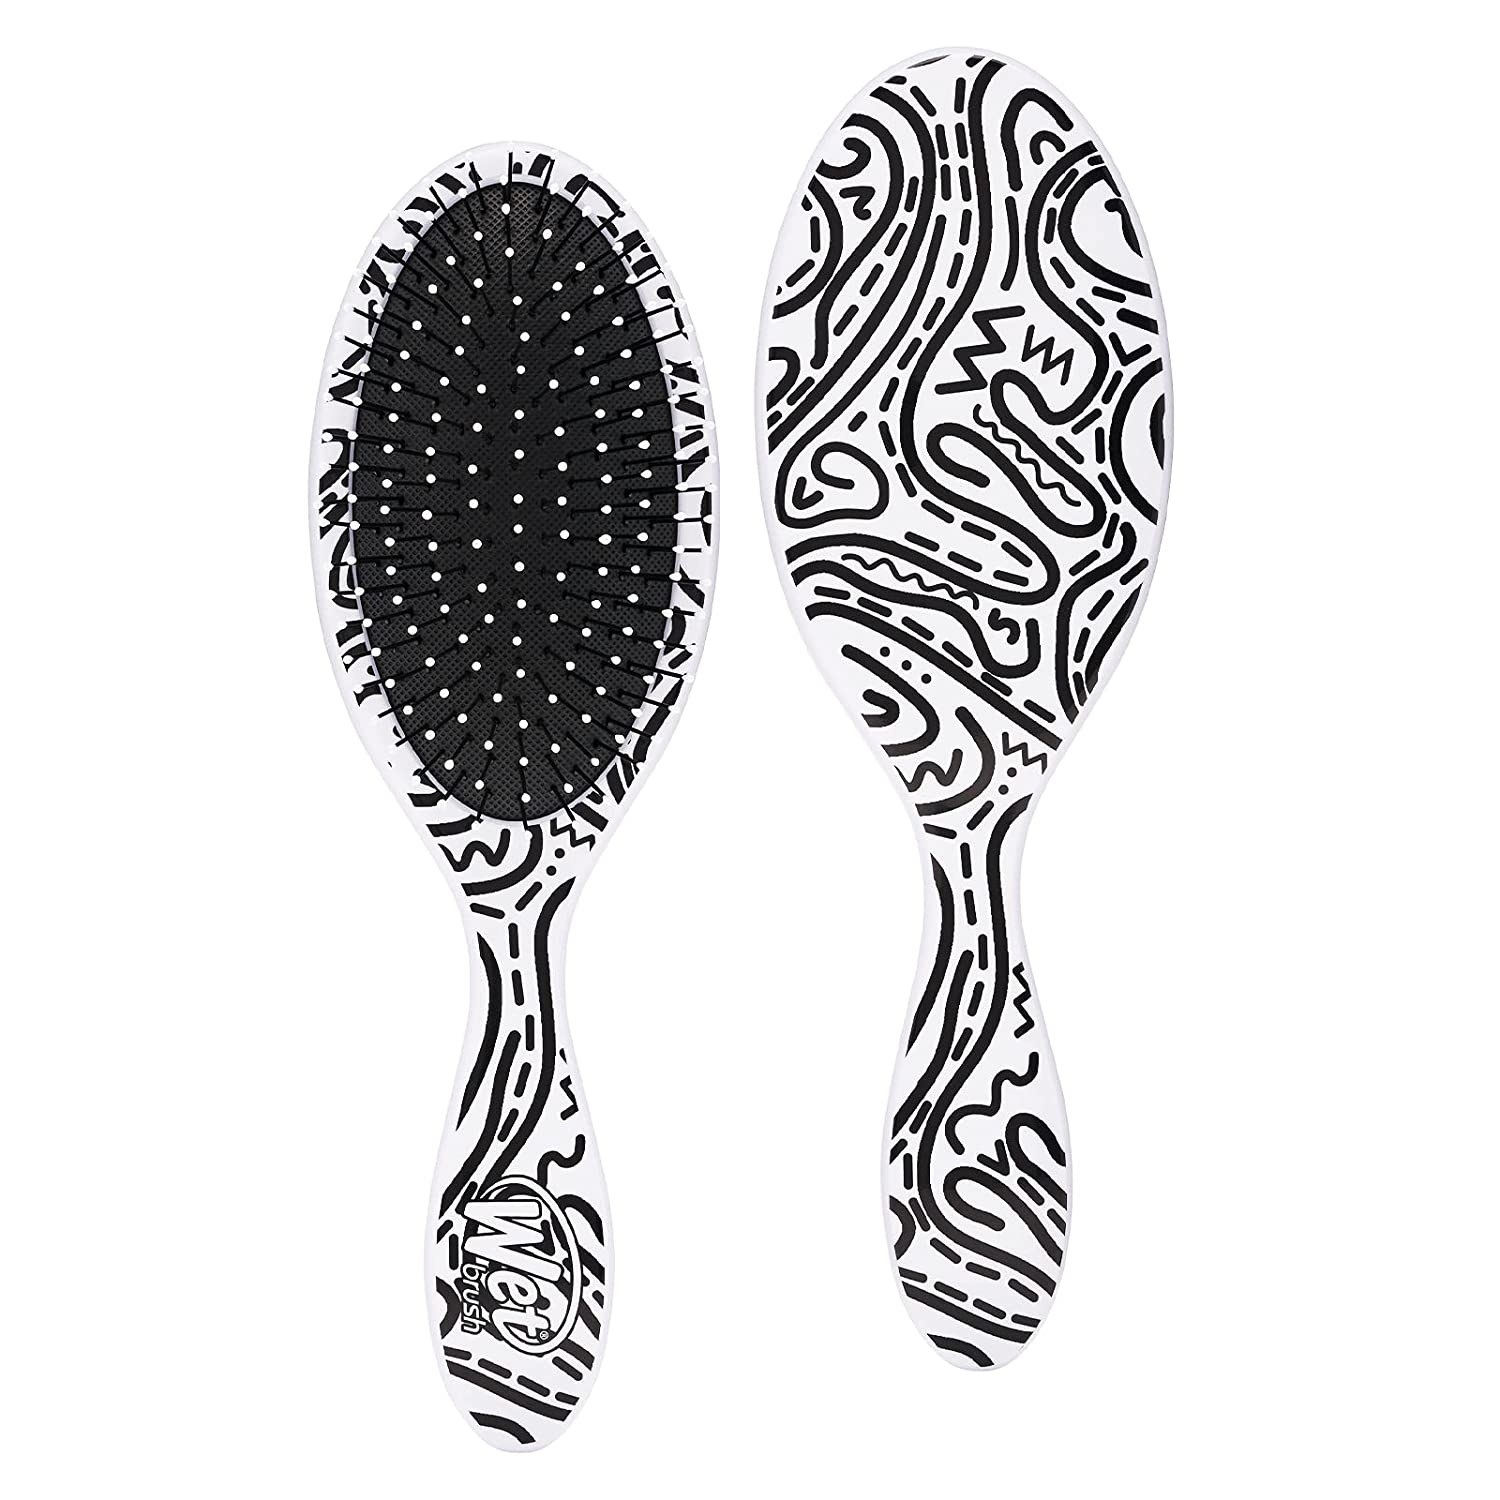 The hair brush in black and white